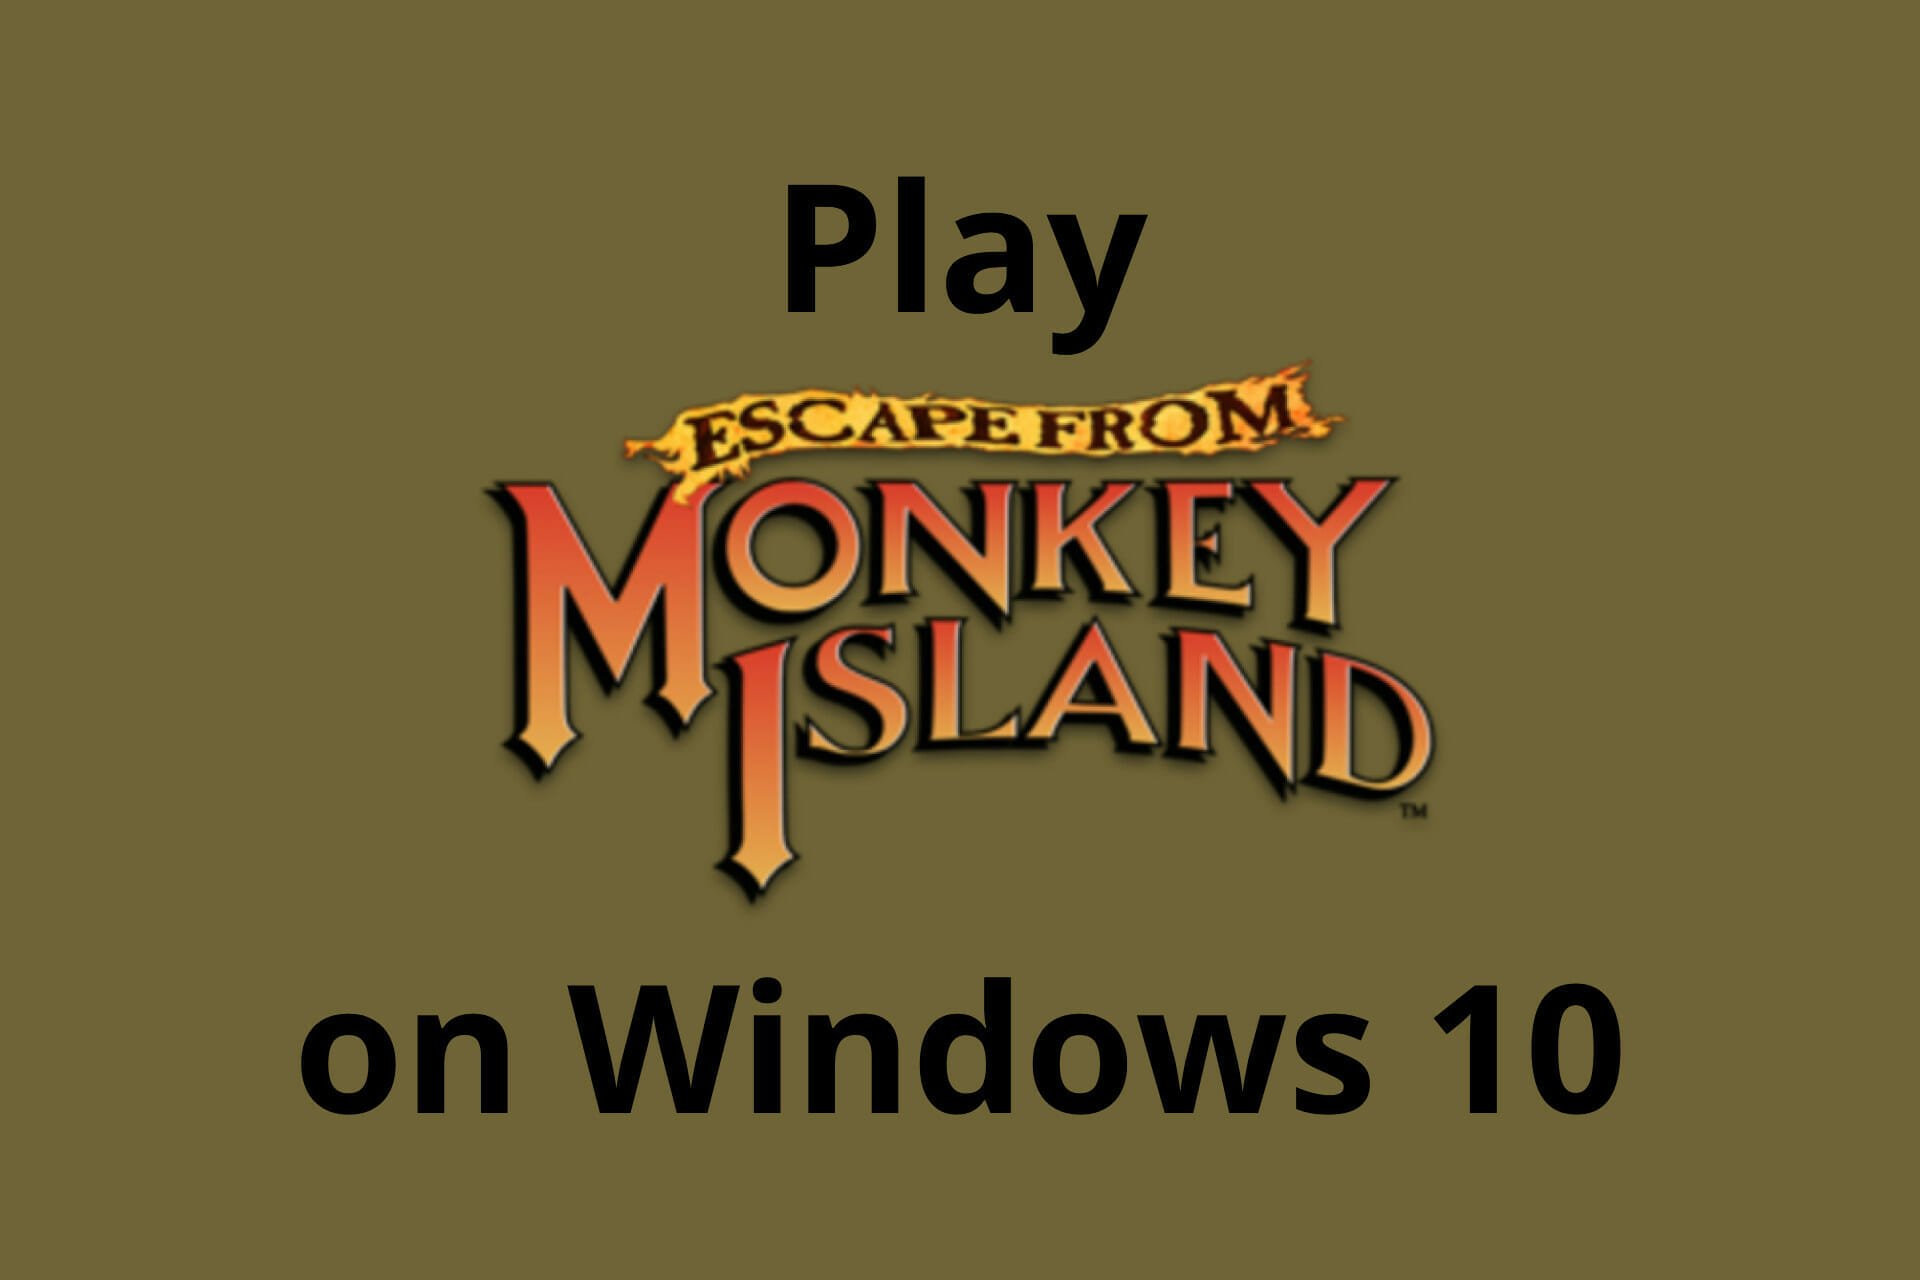 Play Escape from Monkey Island on Windows 10